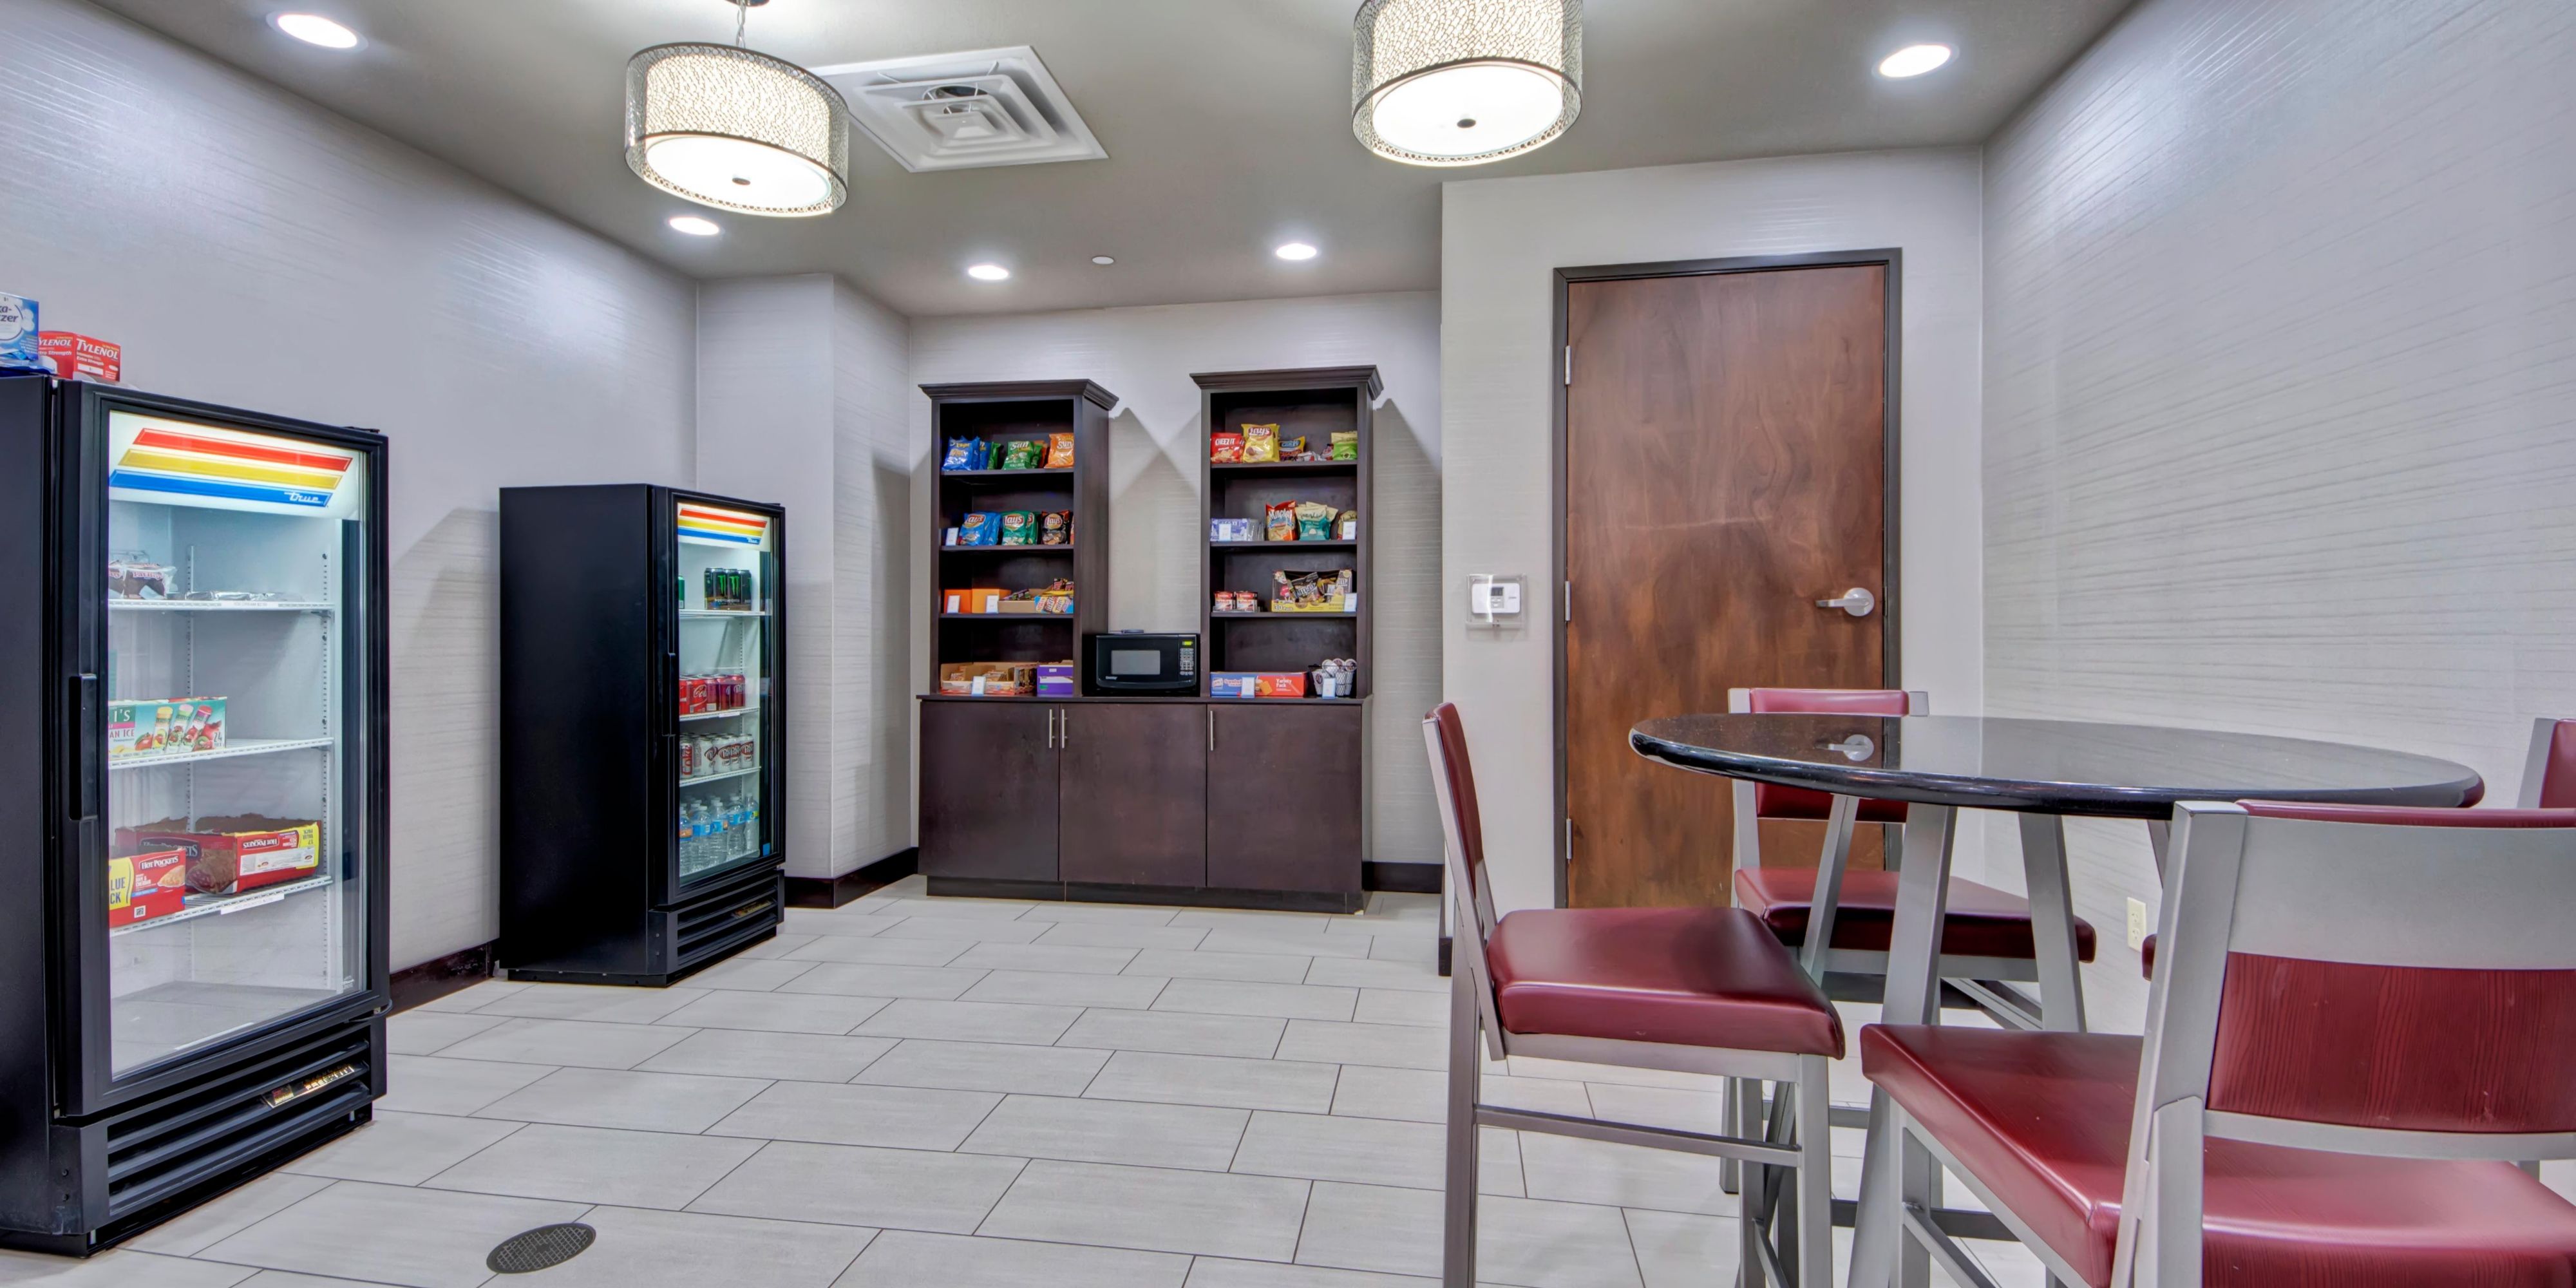 No spare change? Don't worry we don't have vending machines either but we do have The Marketplace. Here you can grab your favorite snacks or beverages and charge it straight to your room or credit card. So snack away 24-hours a day!
